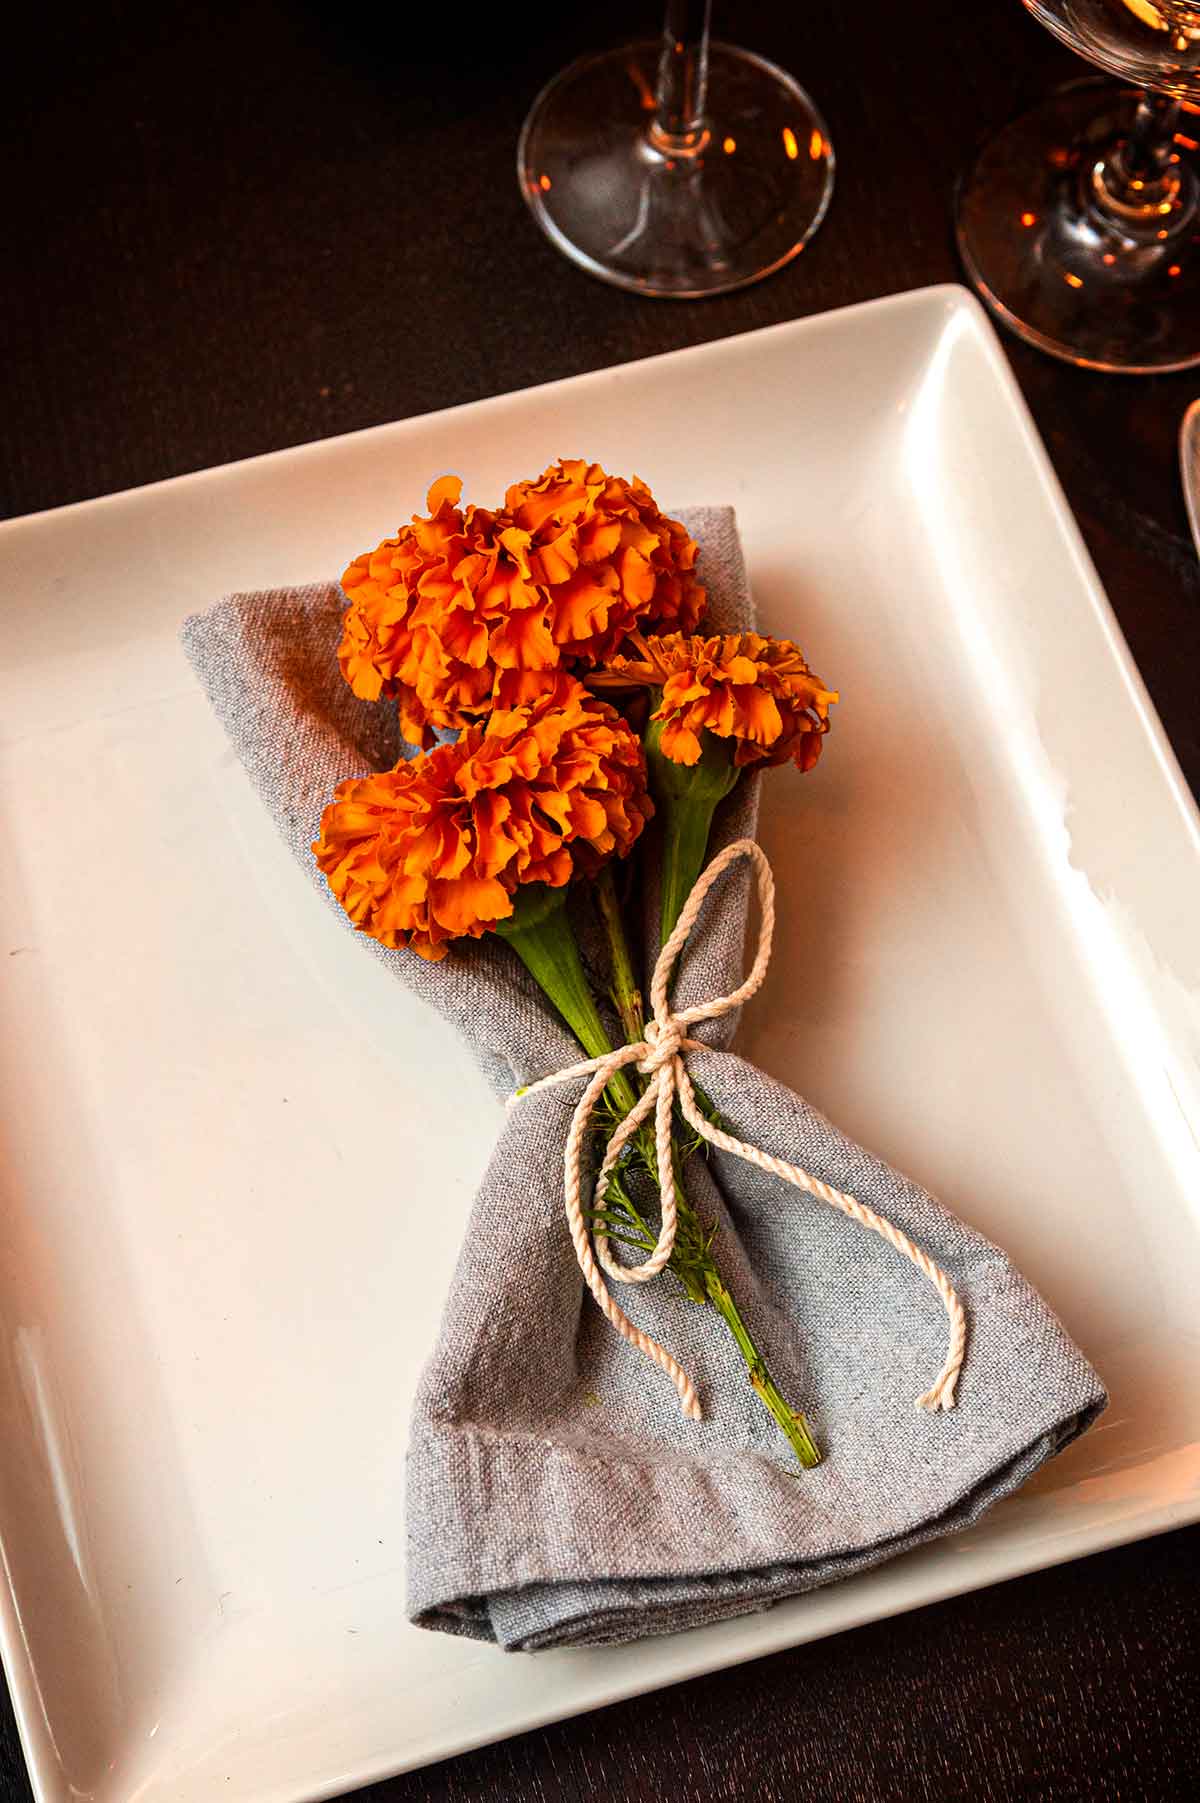 A bouquet of marigolds in a napkin on a plate.